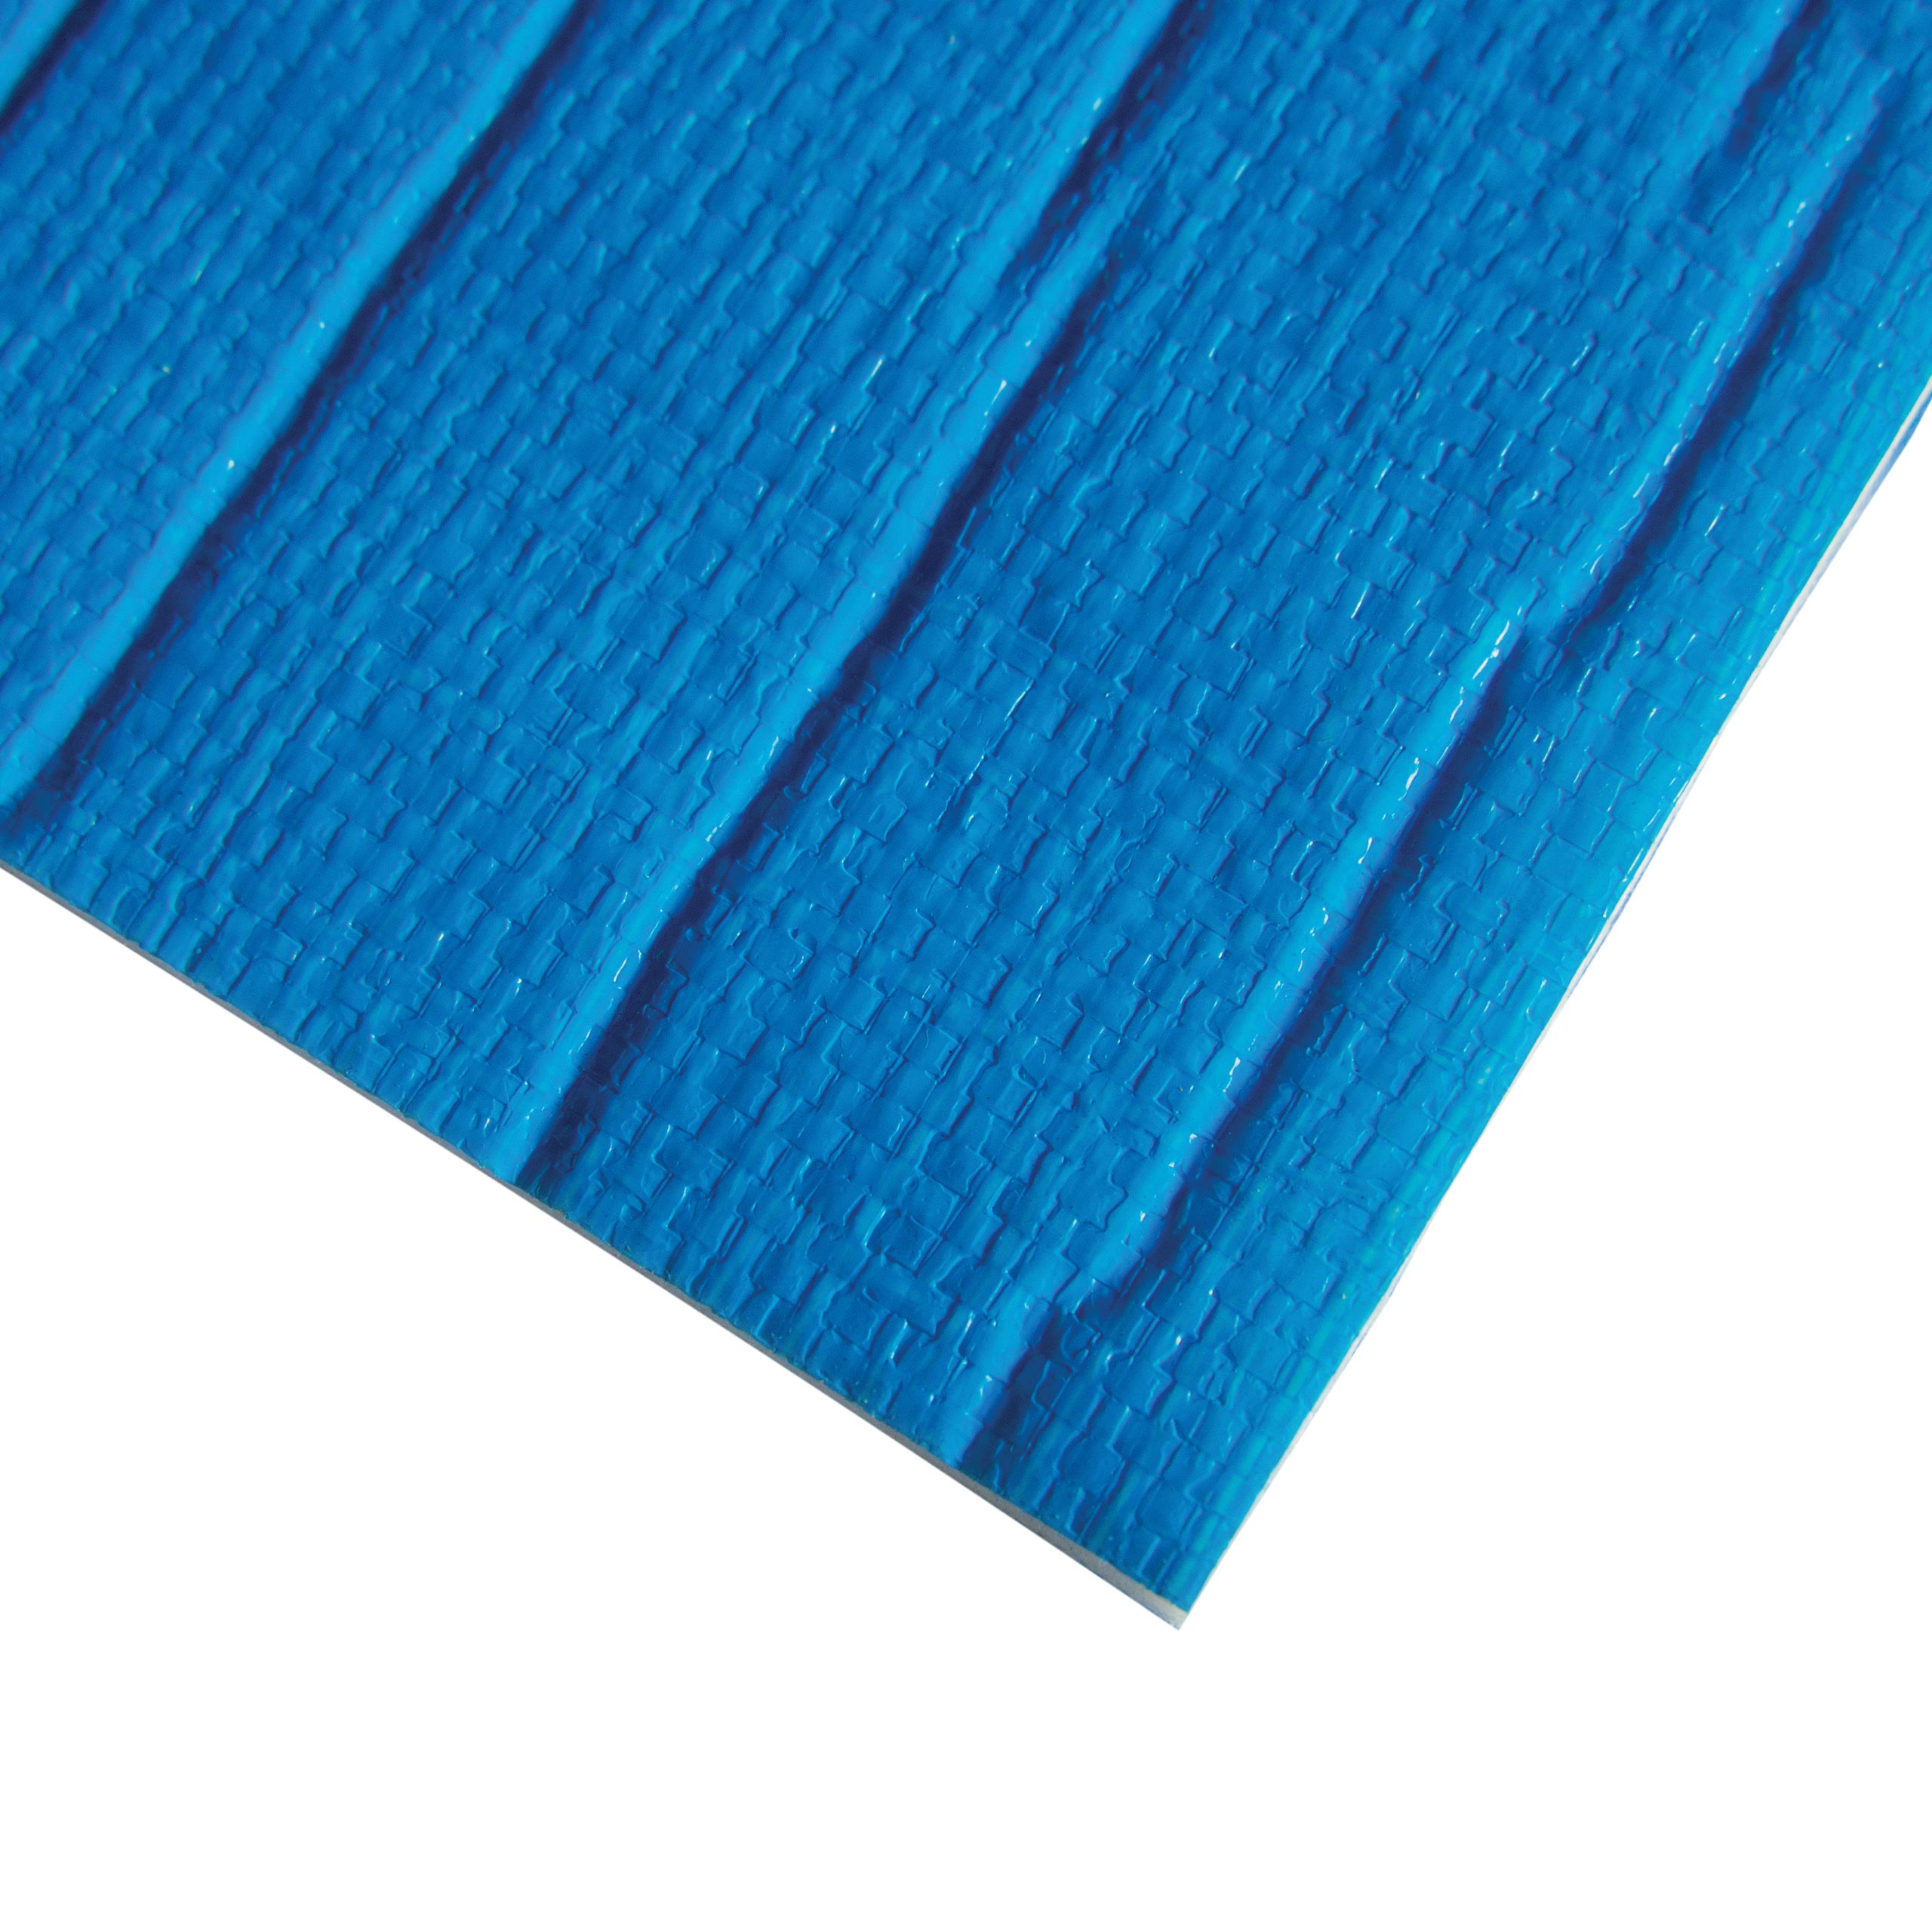 ThermoTech Blue Foam Pool Cover